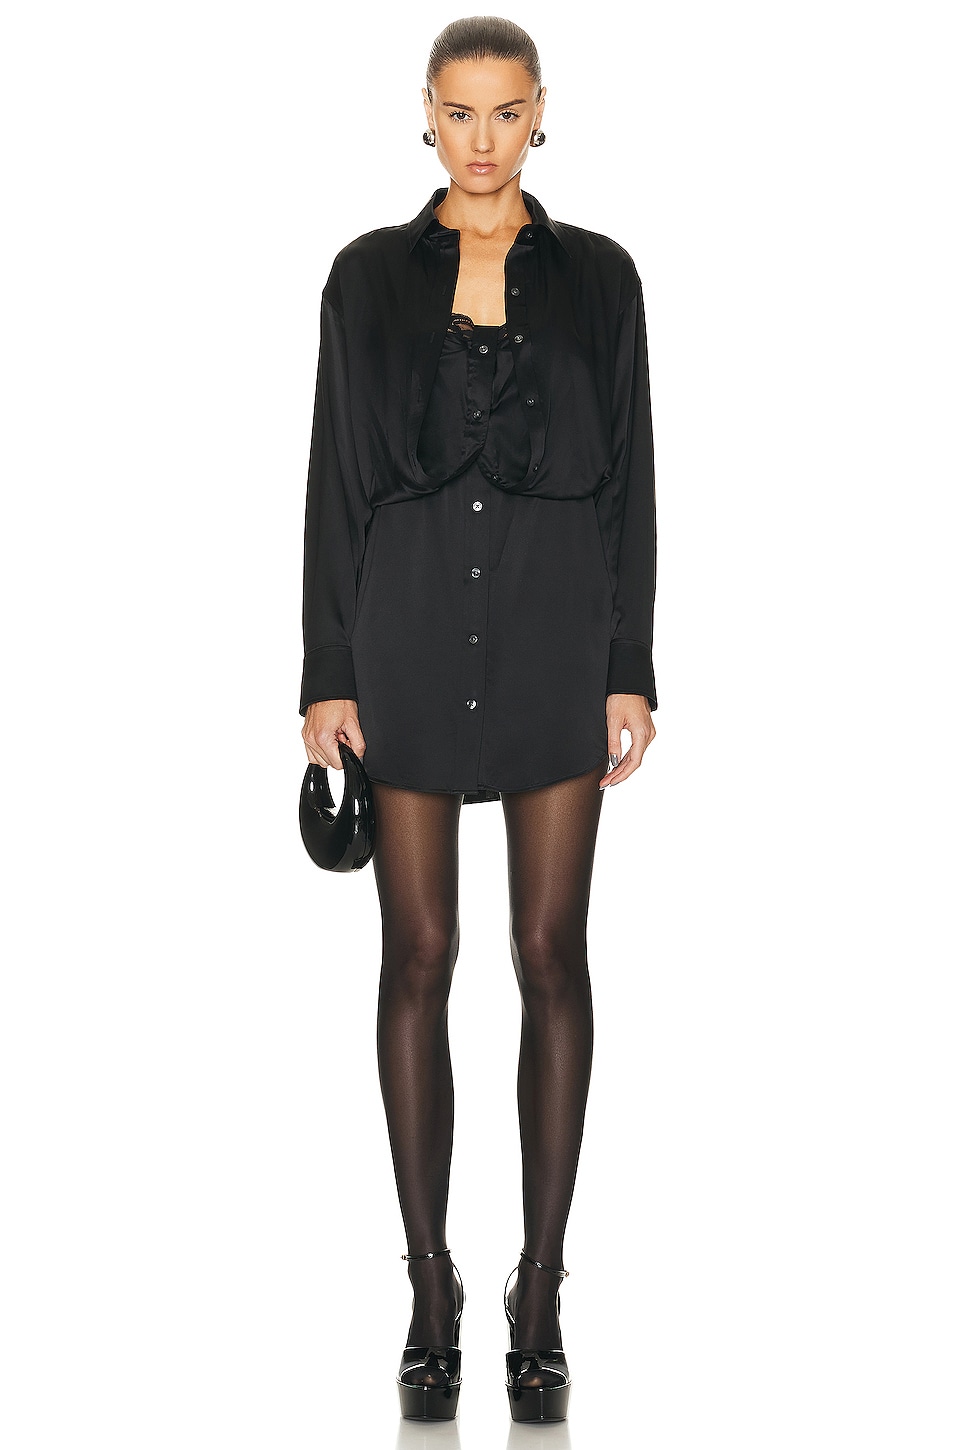 Image 1 of Alexander Wang Button Down Dress in Black